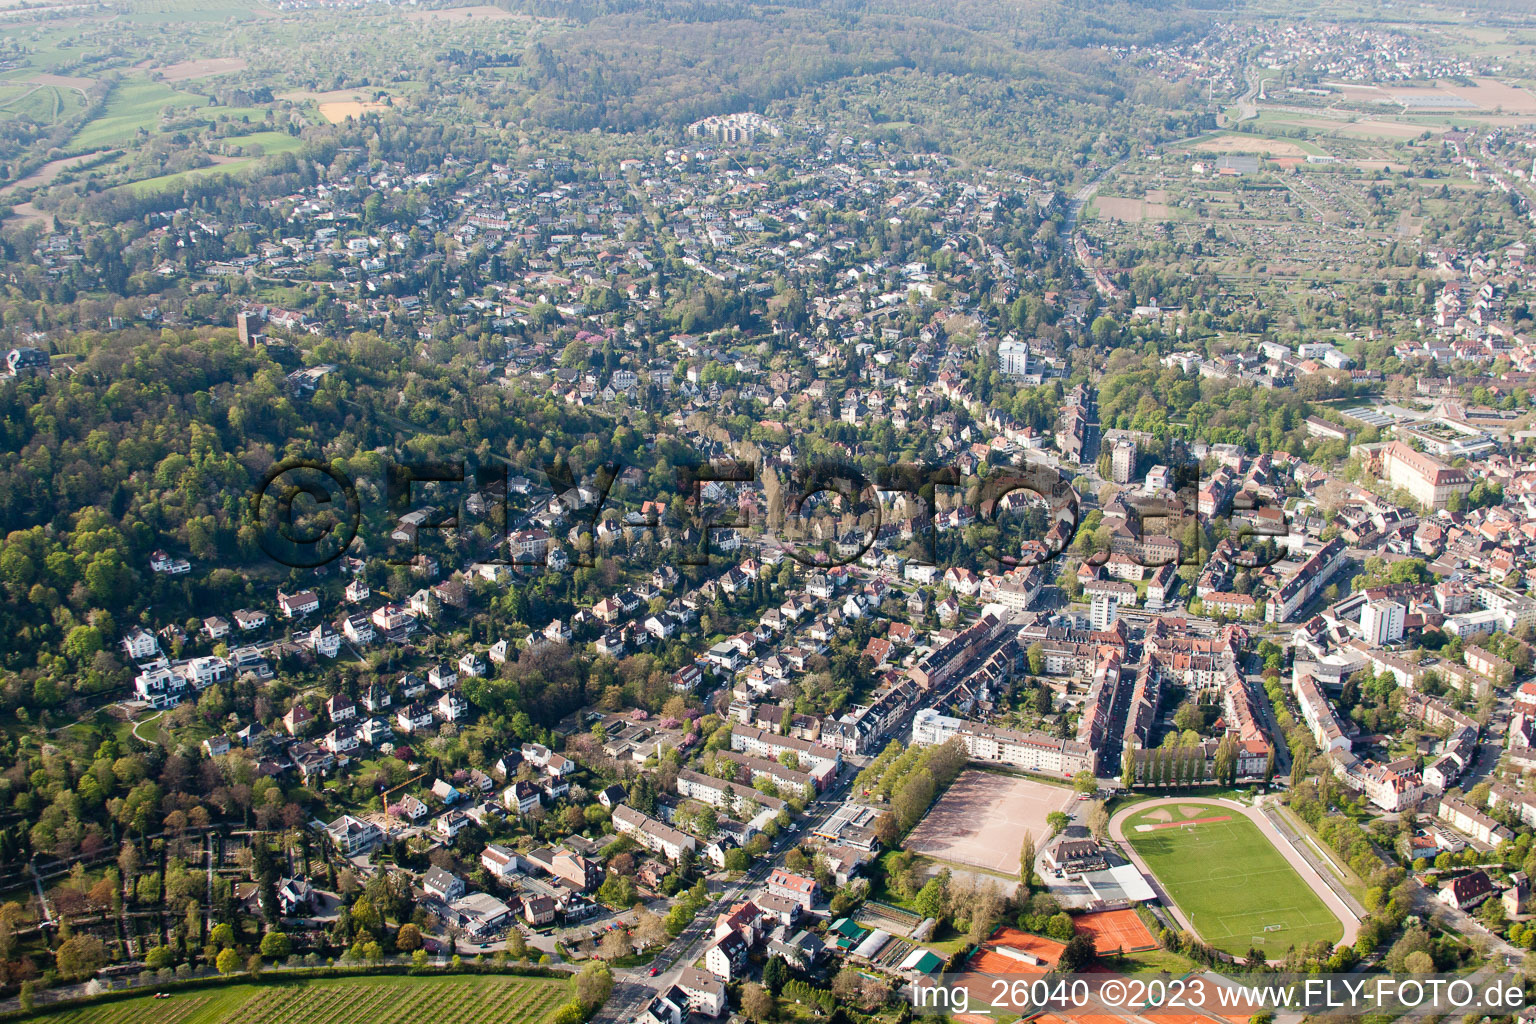 Aerial photograpy of Tower Mountain in the district Durlach in Karlsruhe in the state Baden-Wuerttemberg, Germany